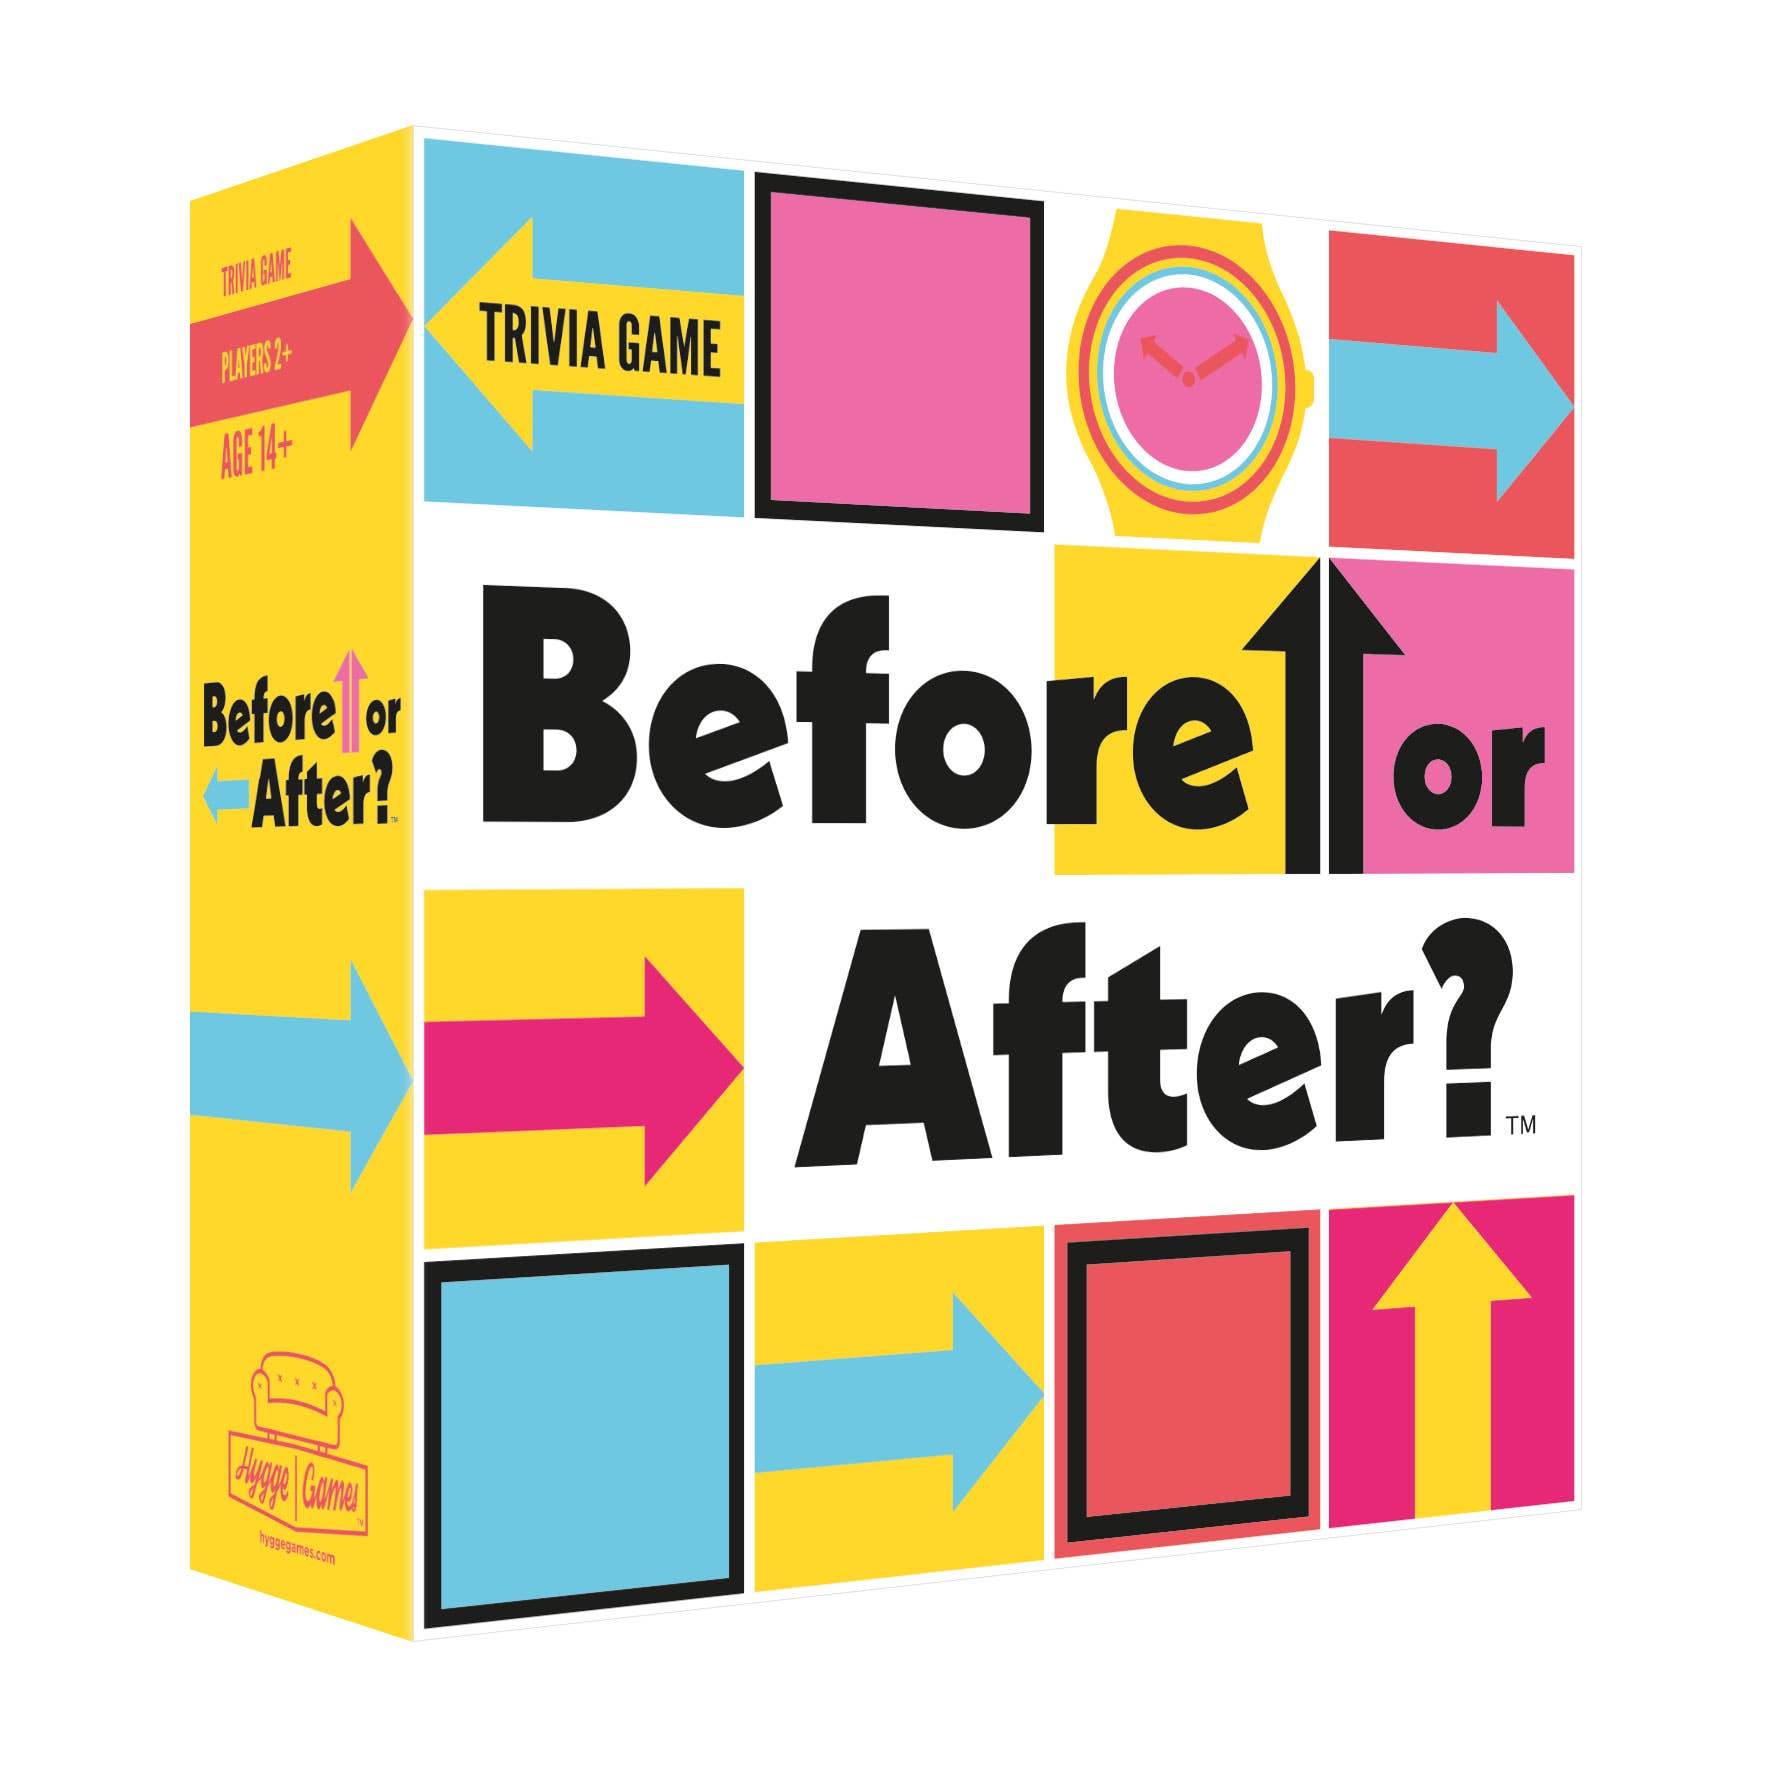 Before or After Trivia Game from Hyggee Games Ages 14+